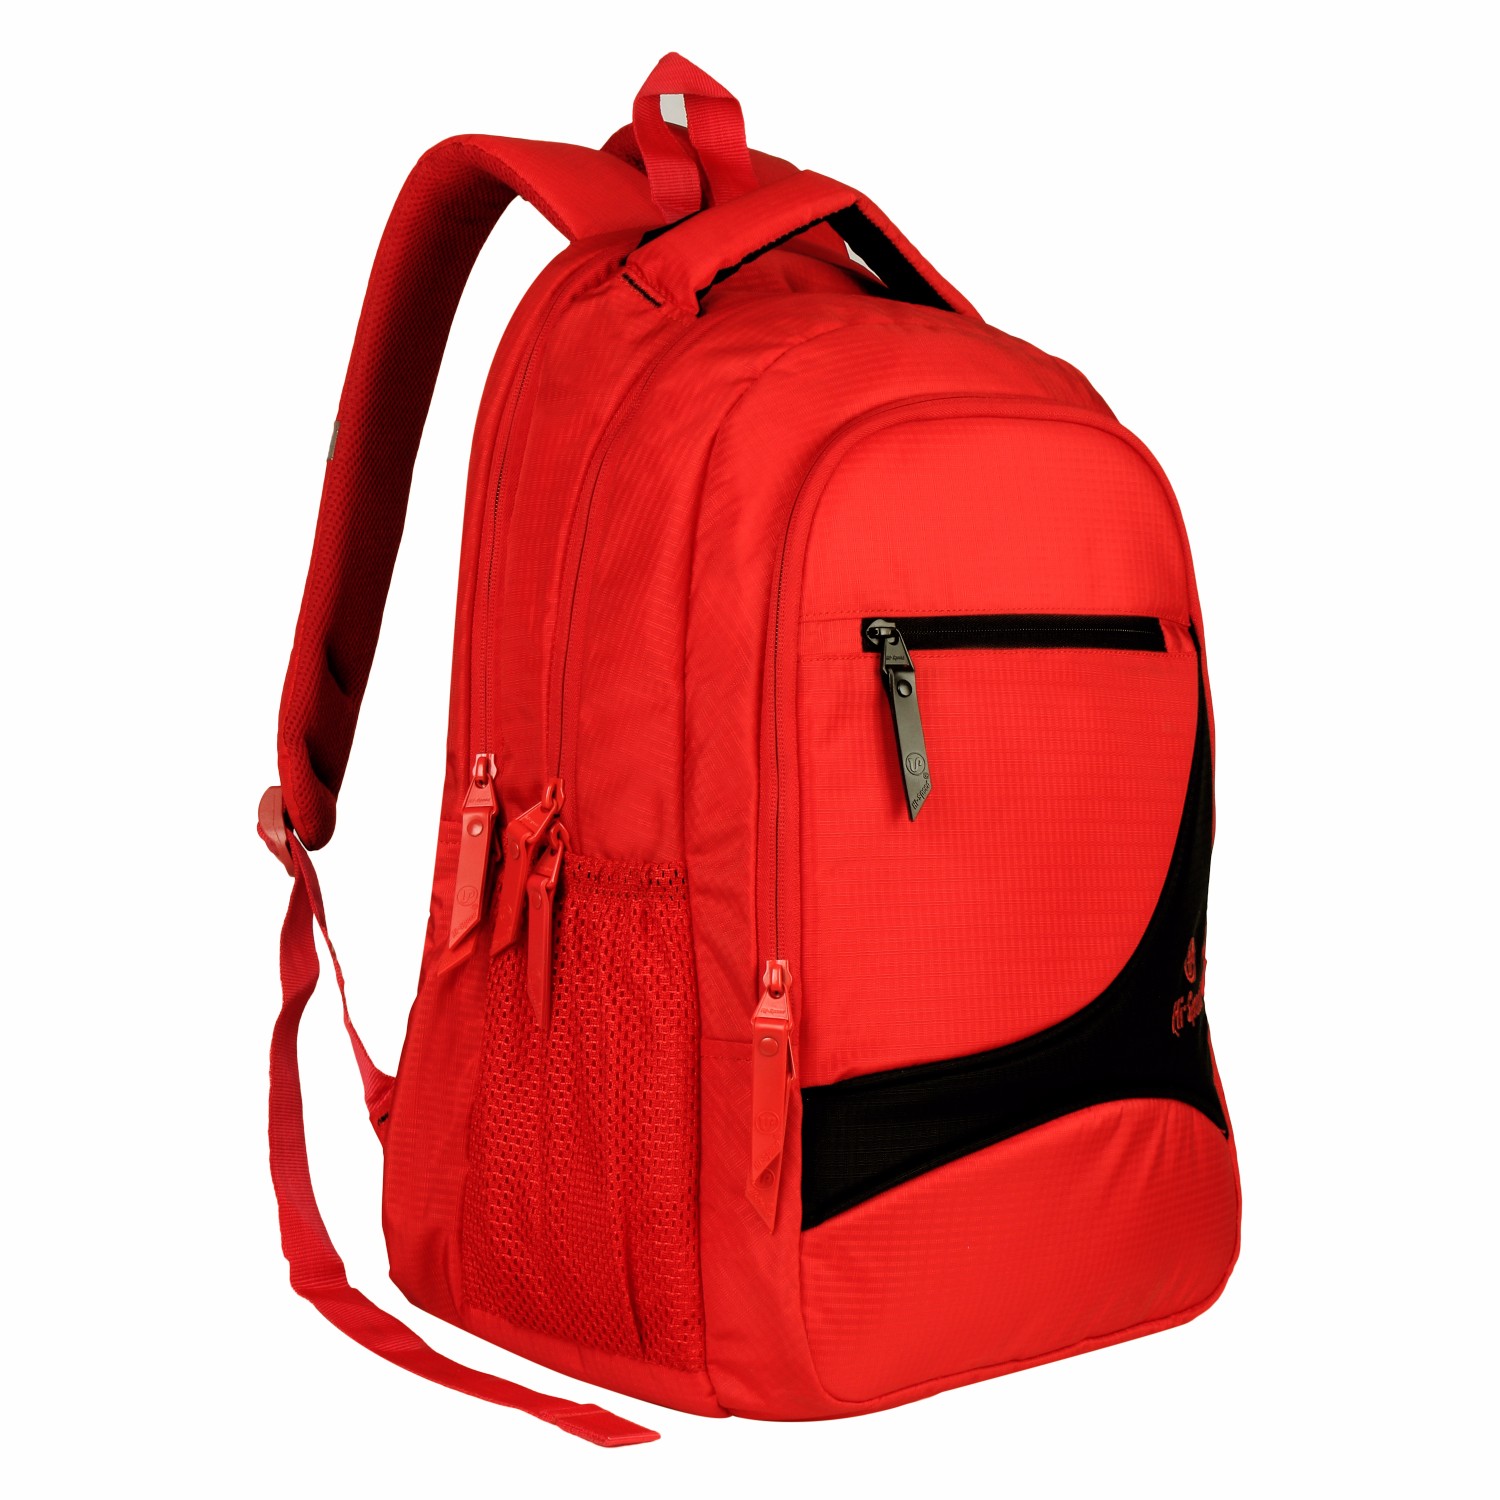 Buy Hi-Speed Red-Black Laptop Backpack Online @ ₹1551 from ShopClues